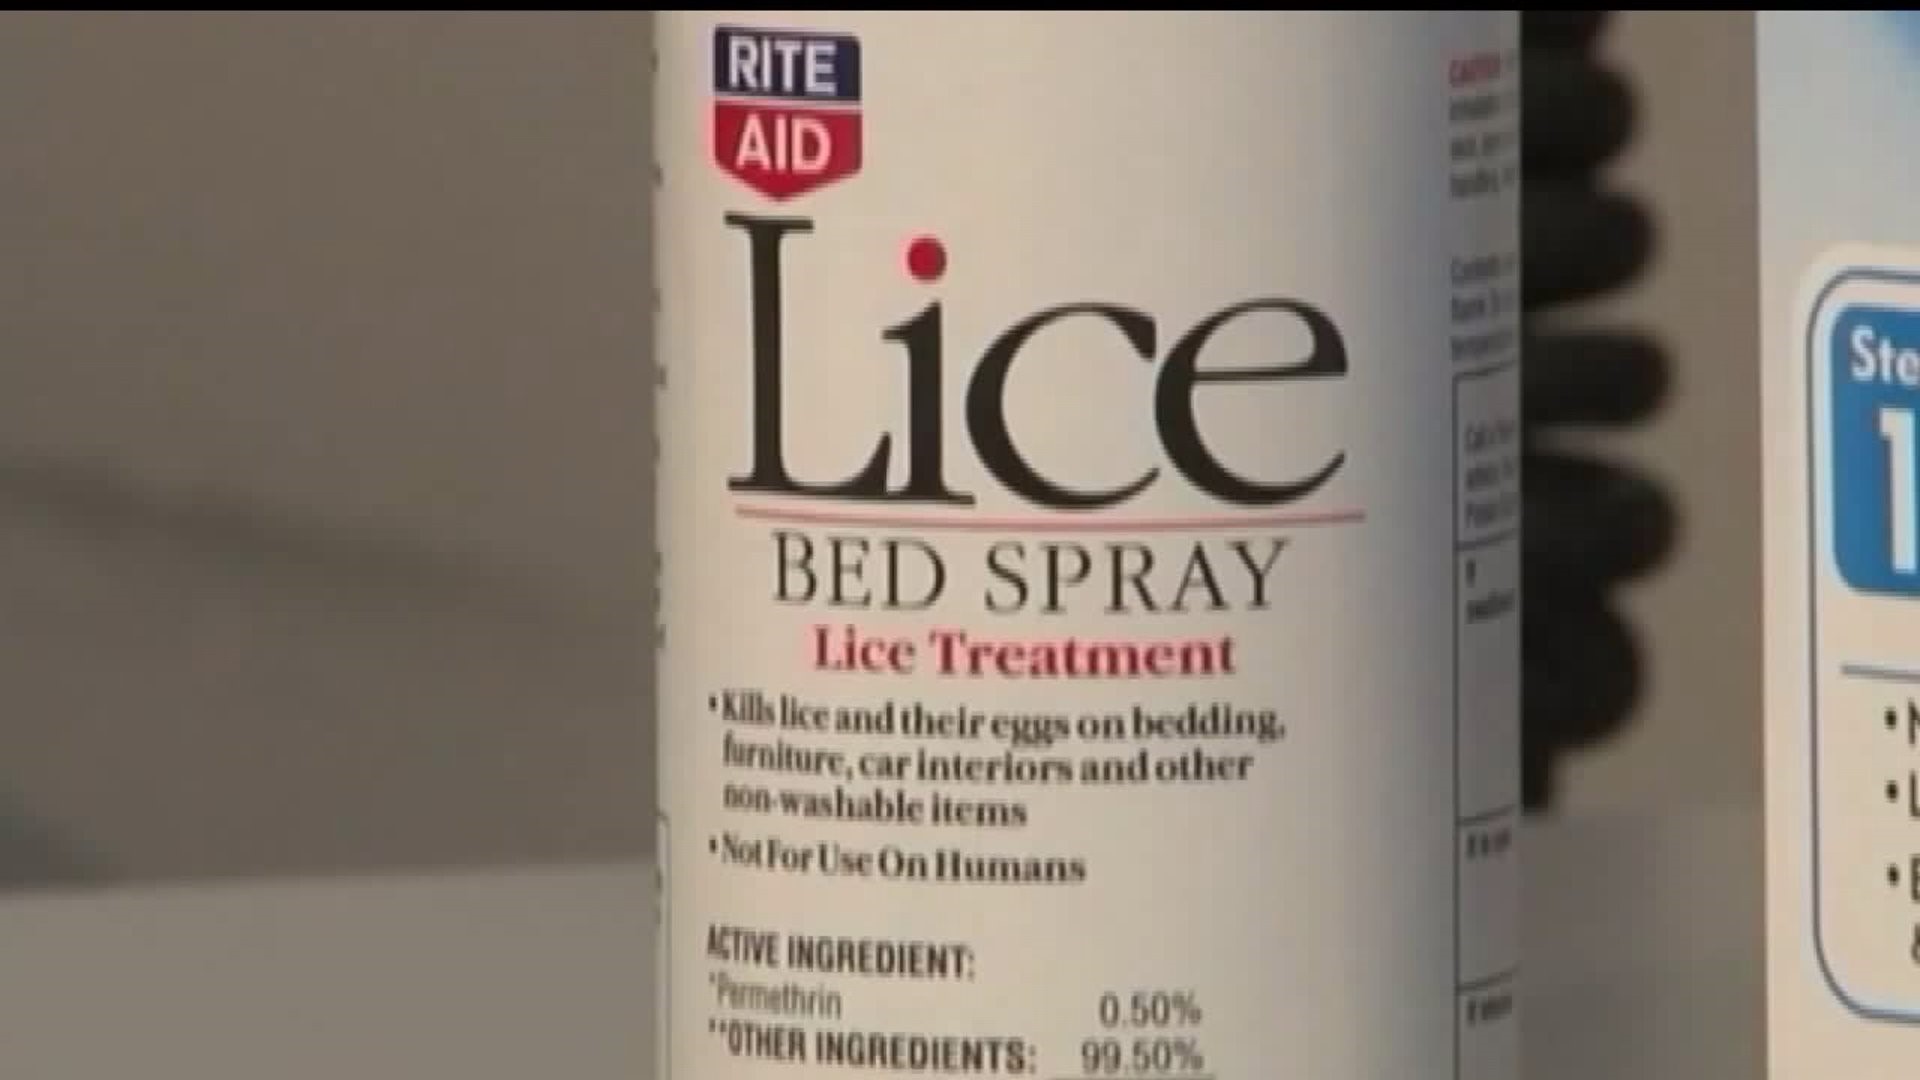 Pin worms and lice are ailments that may affect your child